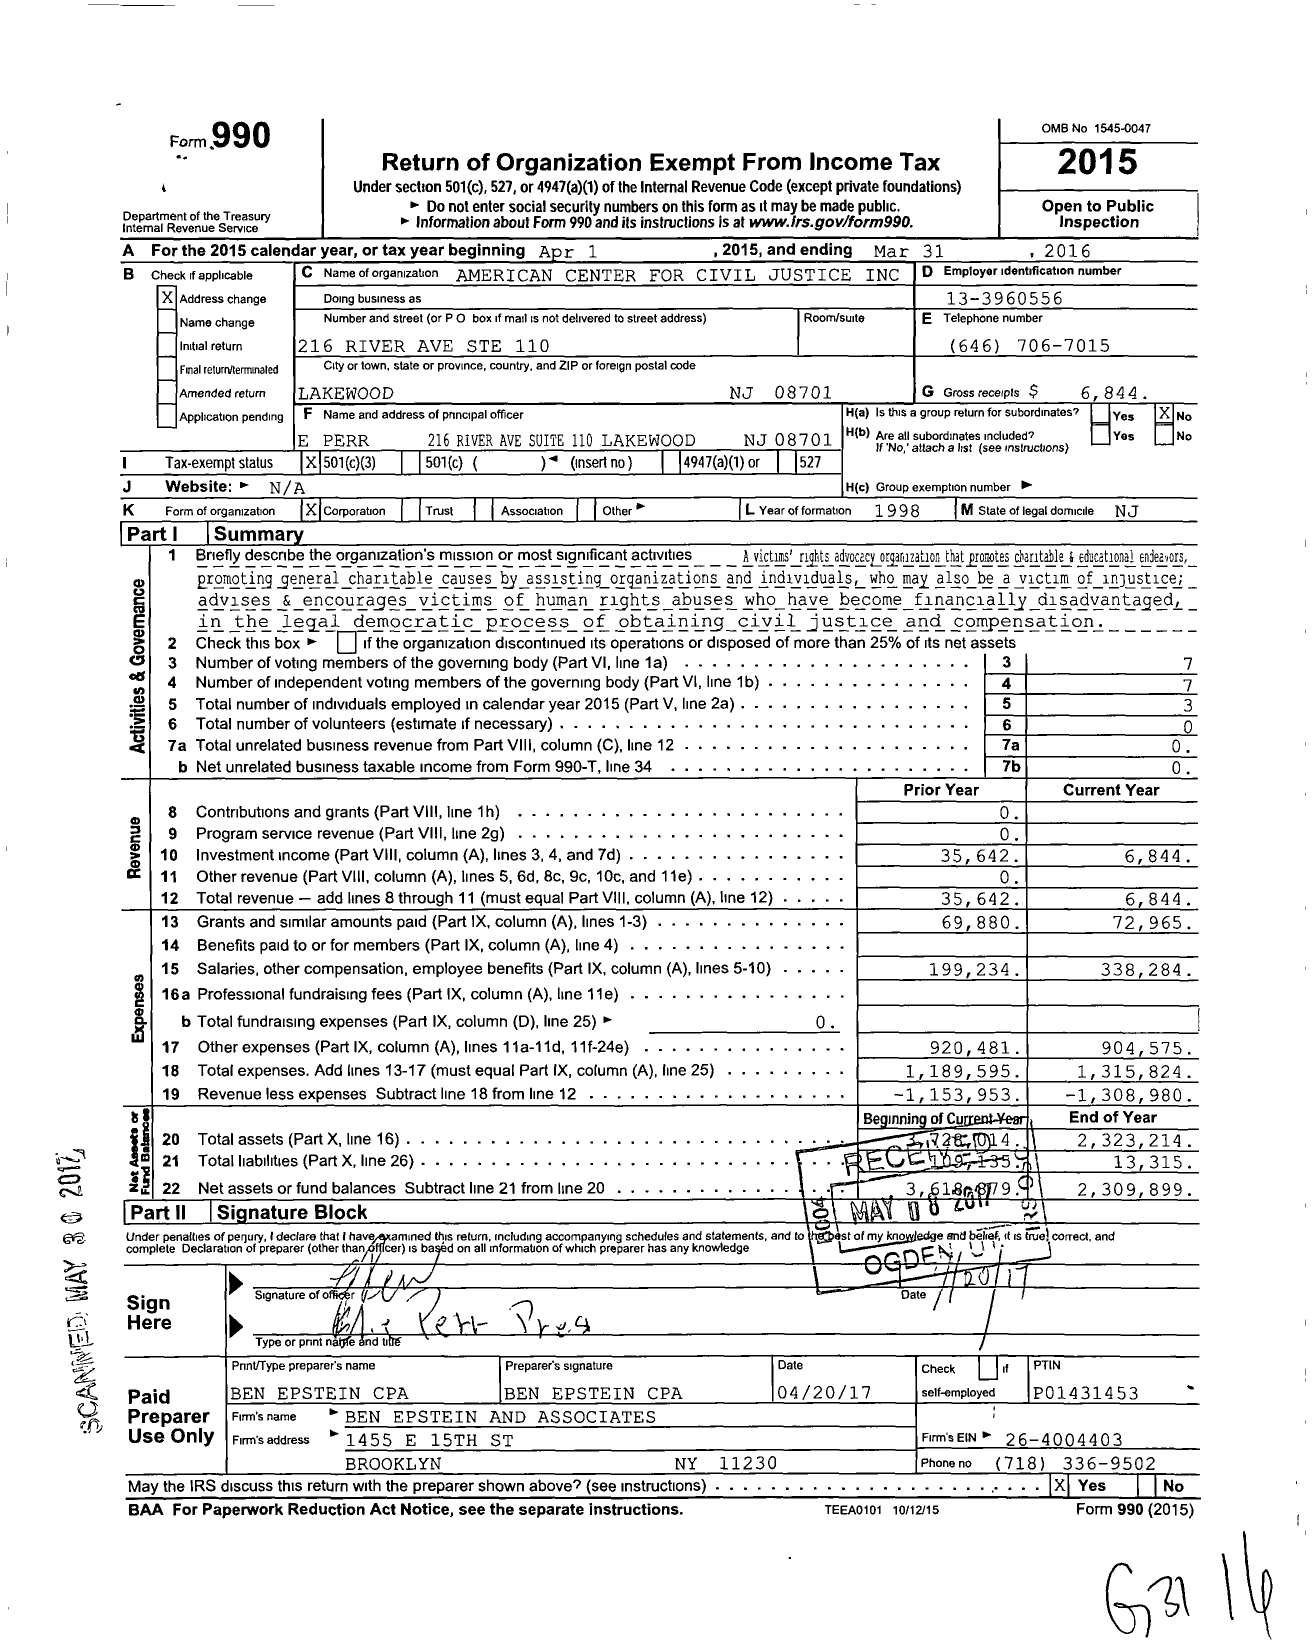 Image of first page of 2015 Form 990 for American Center for Civil Justice